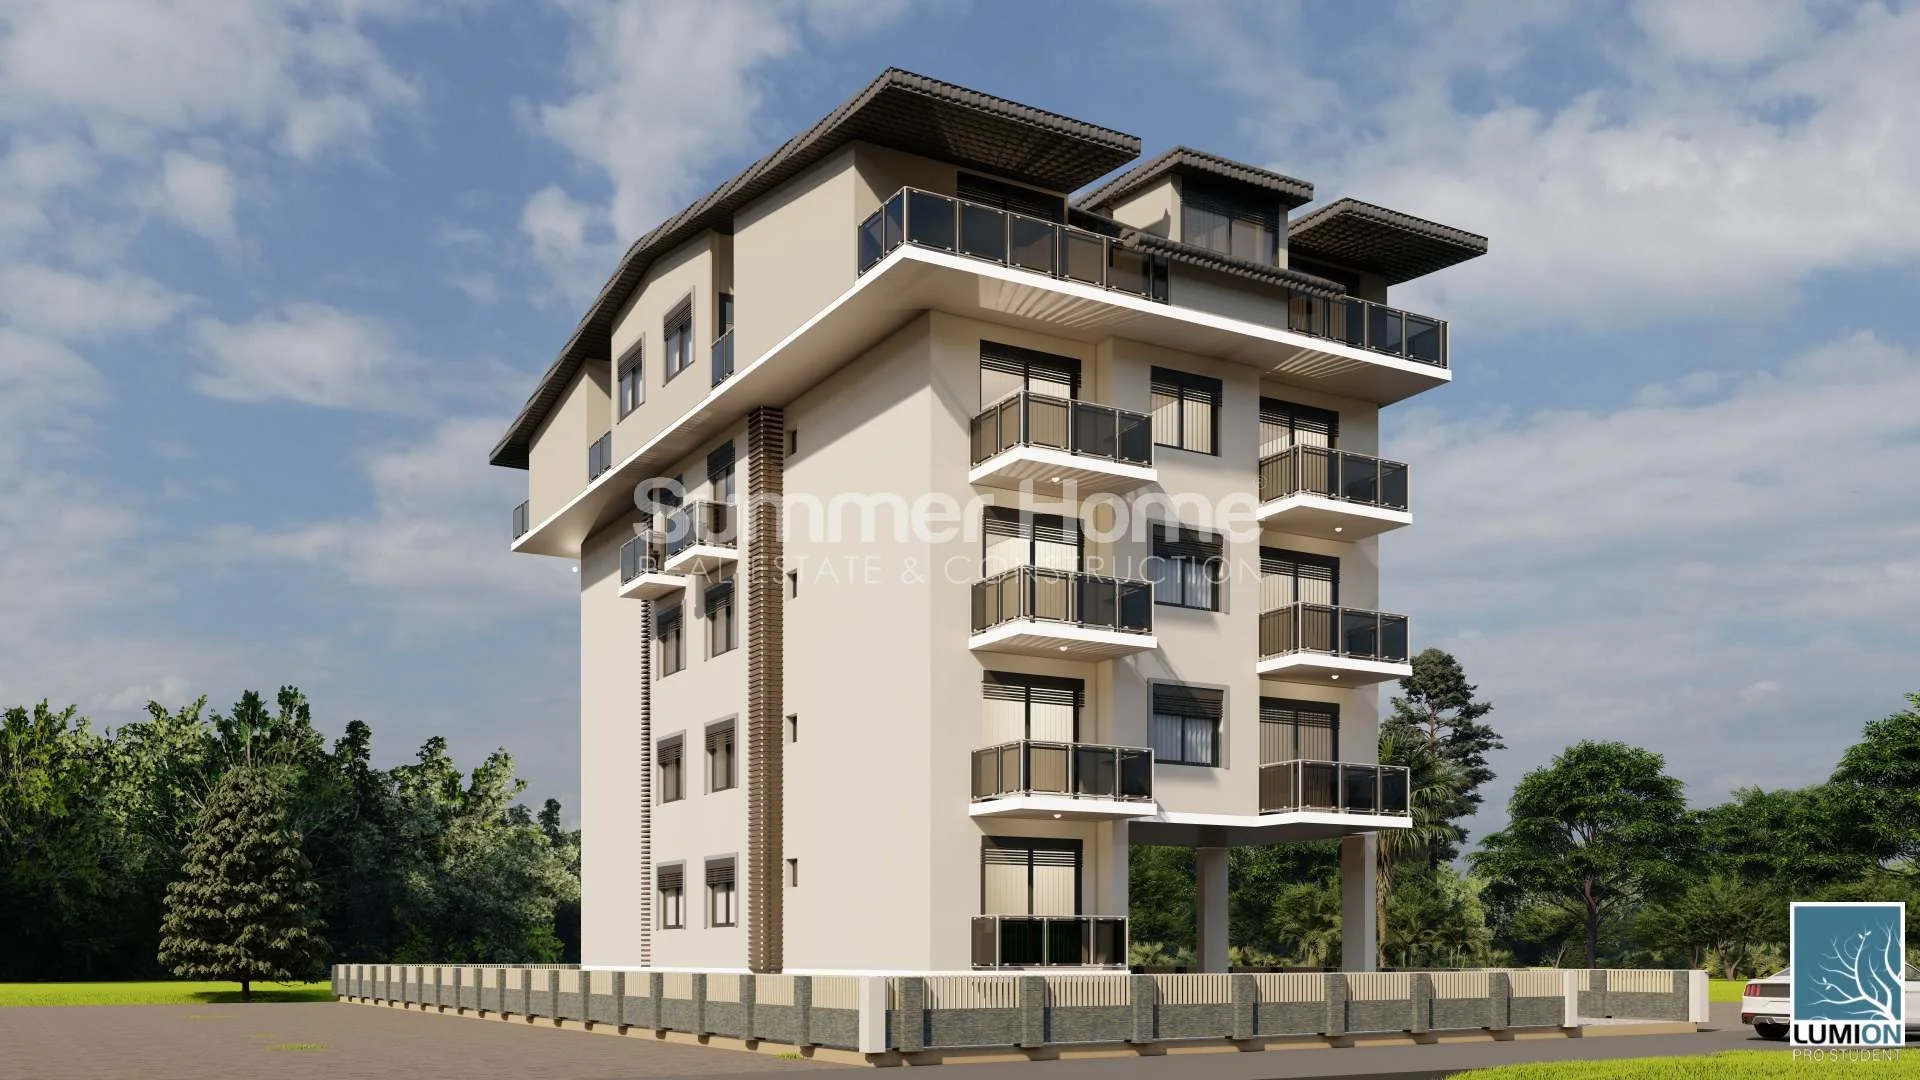 Modern, Chic Apartments For Sale in Gazipasa general - 10